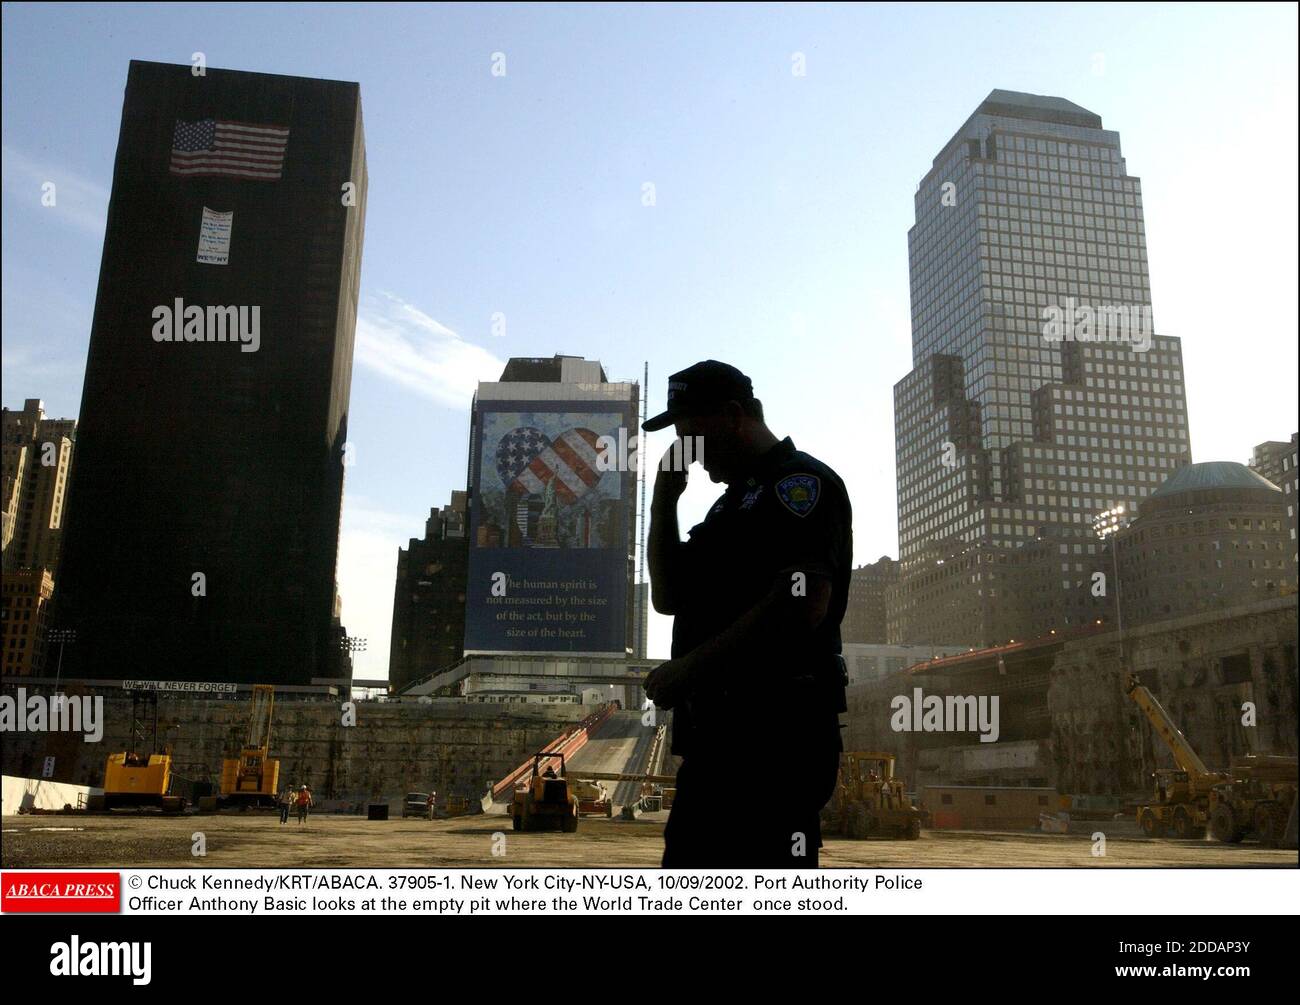 NO FILM, NO VIDEO, NO TV, NO DOCUMENTARY - © Chuck Kennedy/KRT/ABACA. 37905-1. New York City-NY-USA, 10/09/2002. Port Authority Police Officer Anthony Basic looks at the empty pit where the World Trade Center once stood. Stock Photo